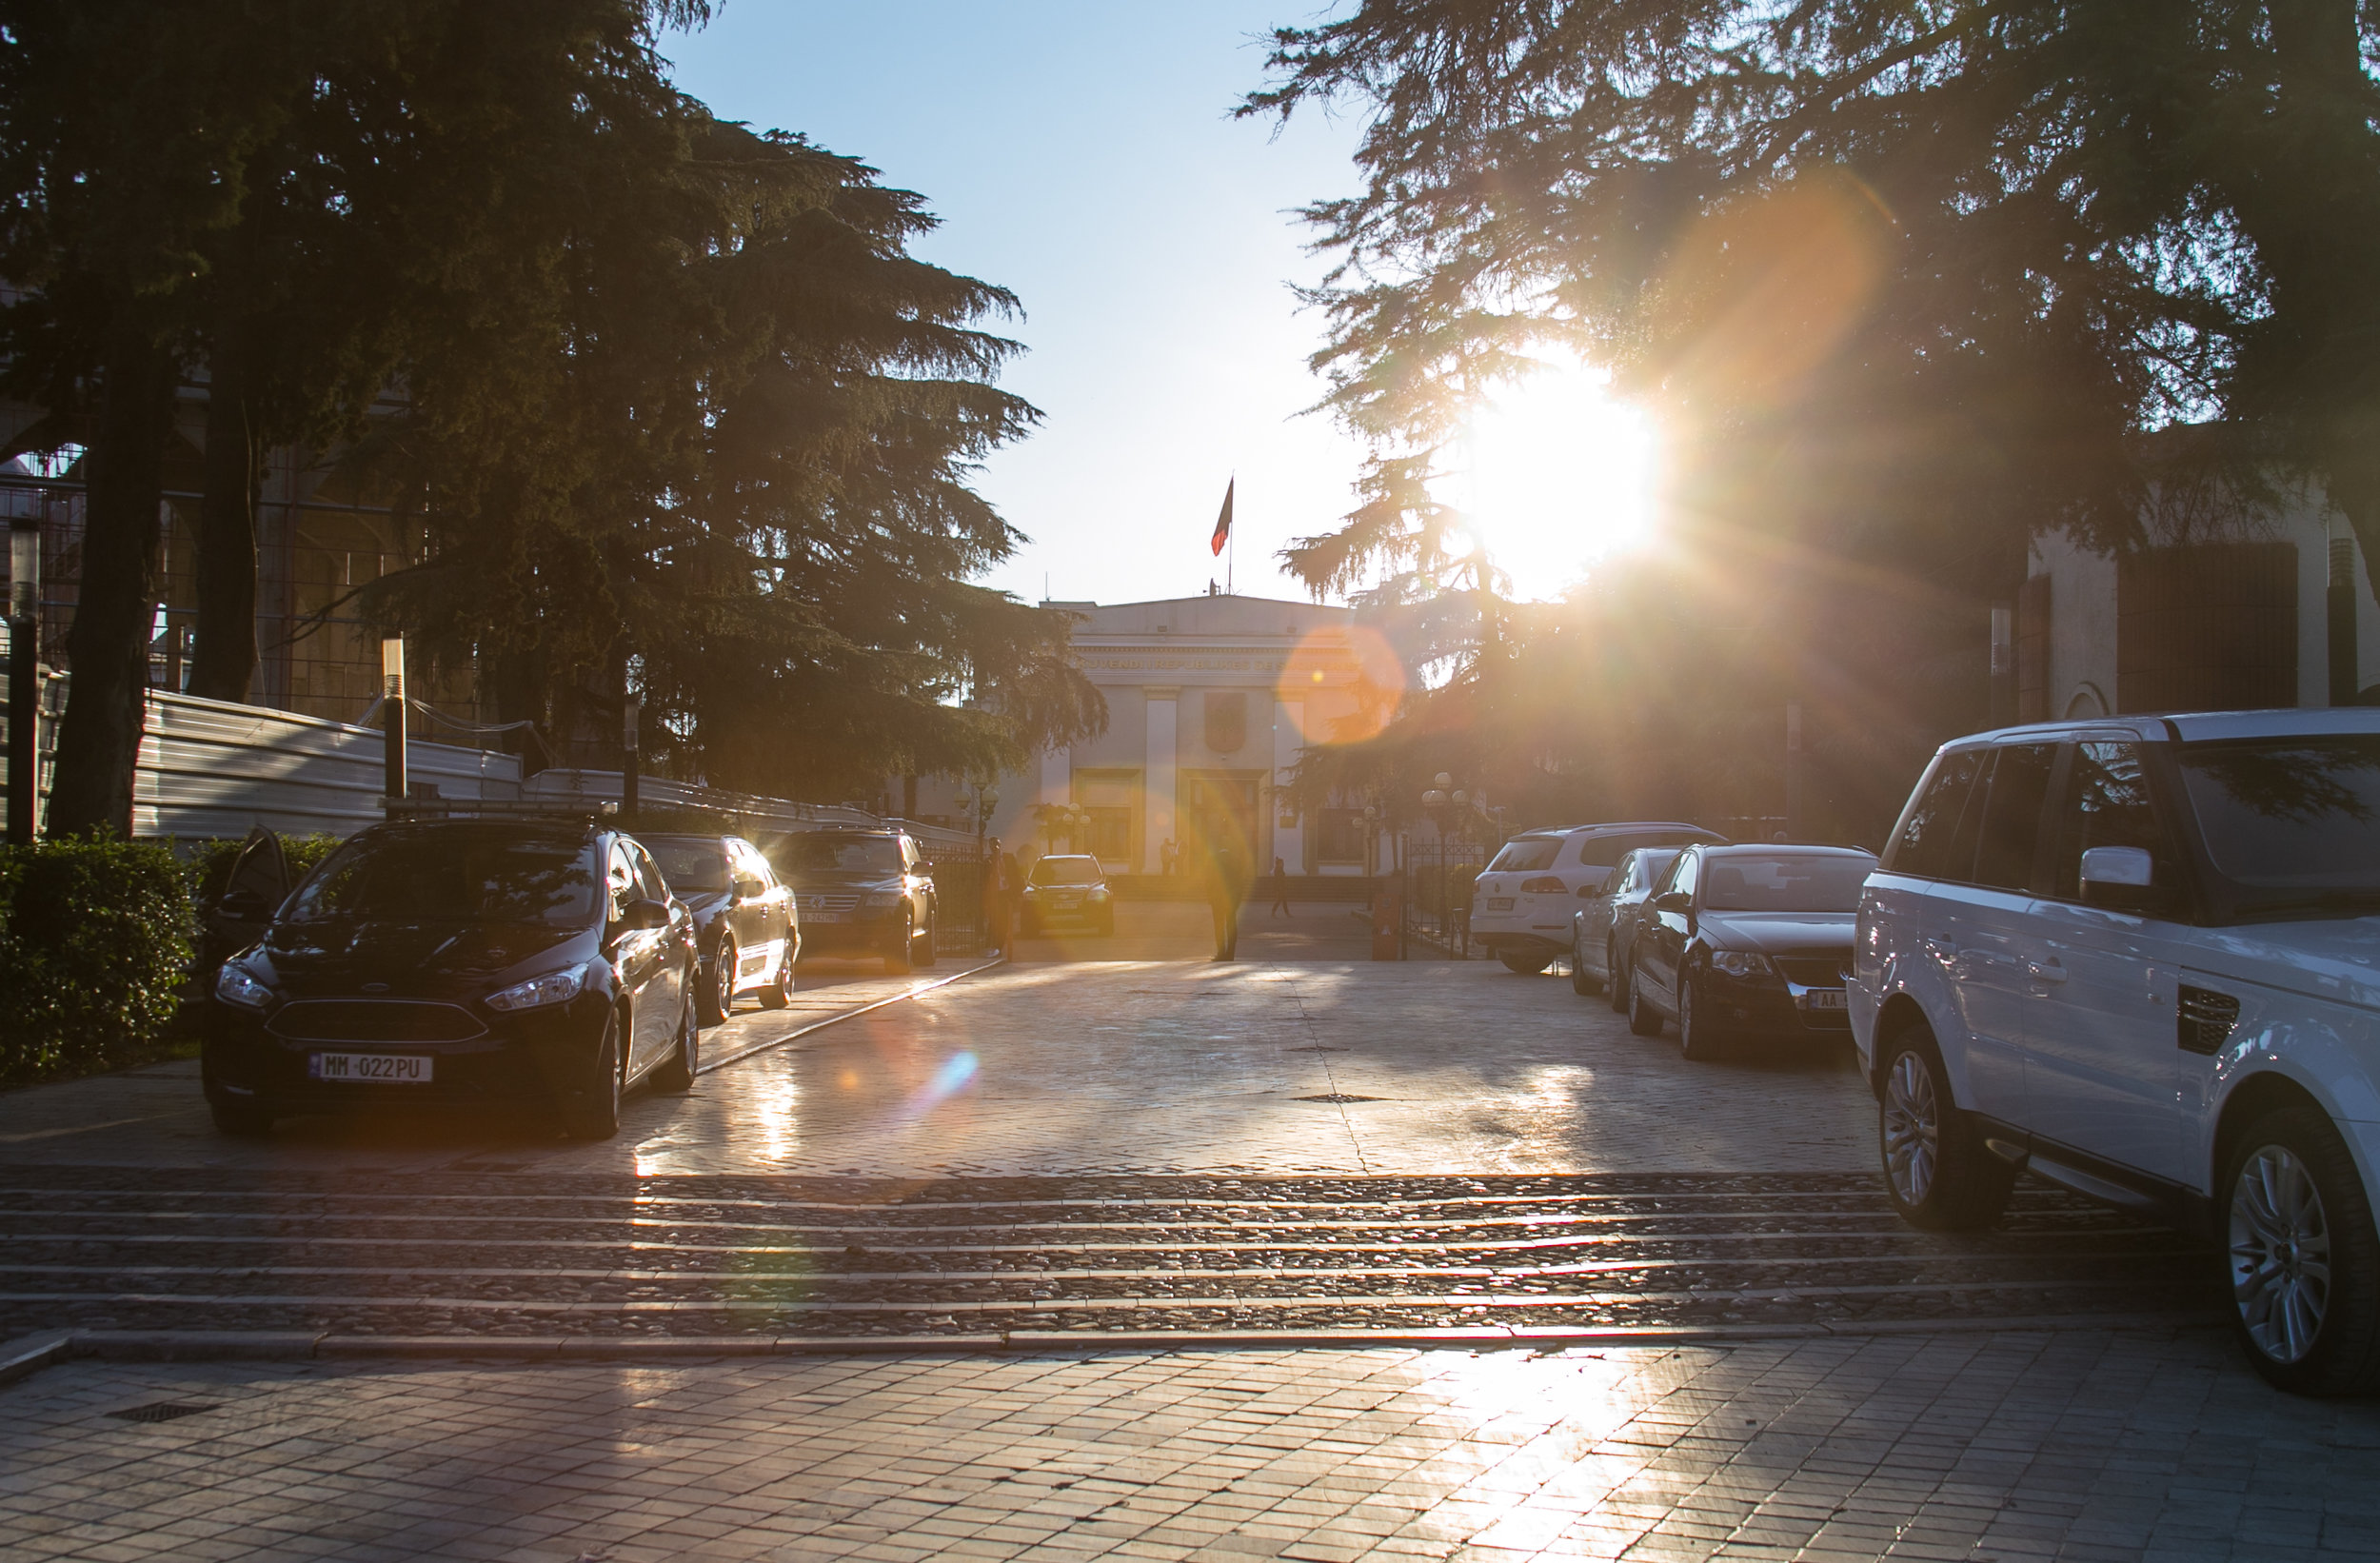  An Albanian Government building sits at the end of a guarded drive as the sun sets. 